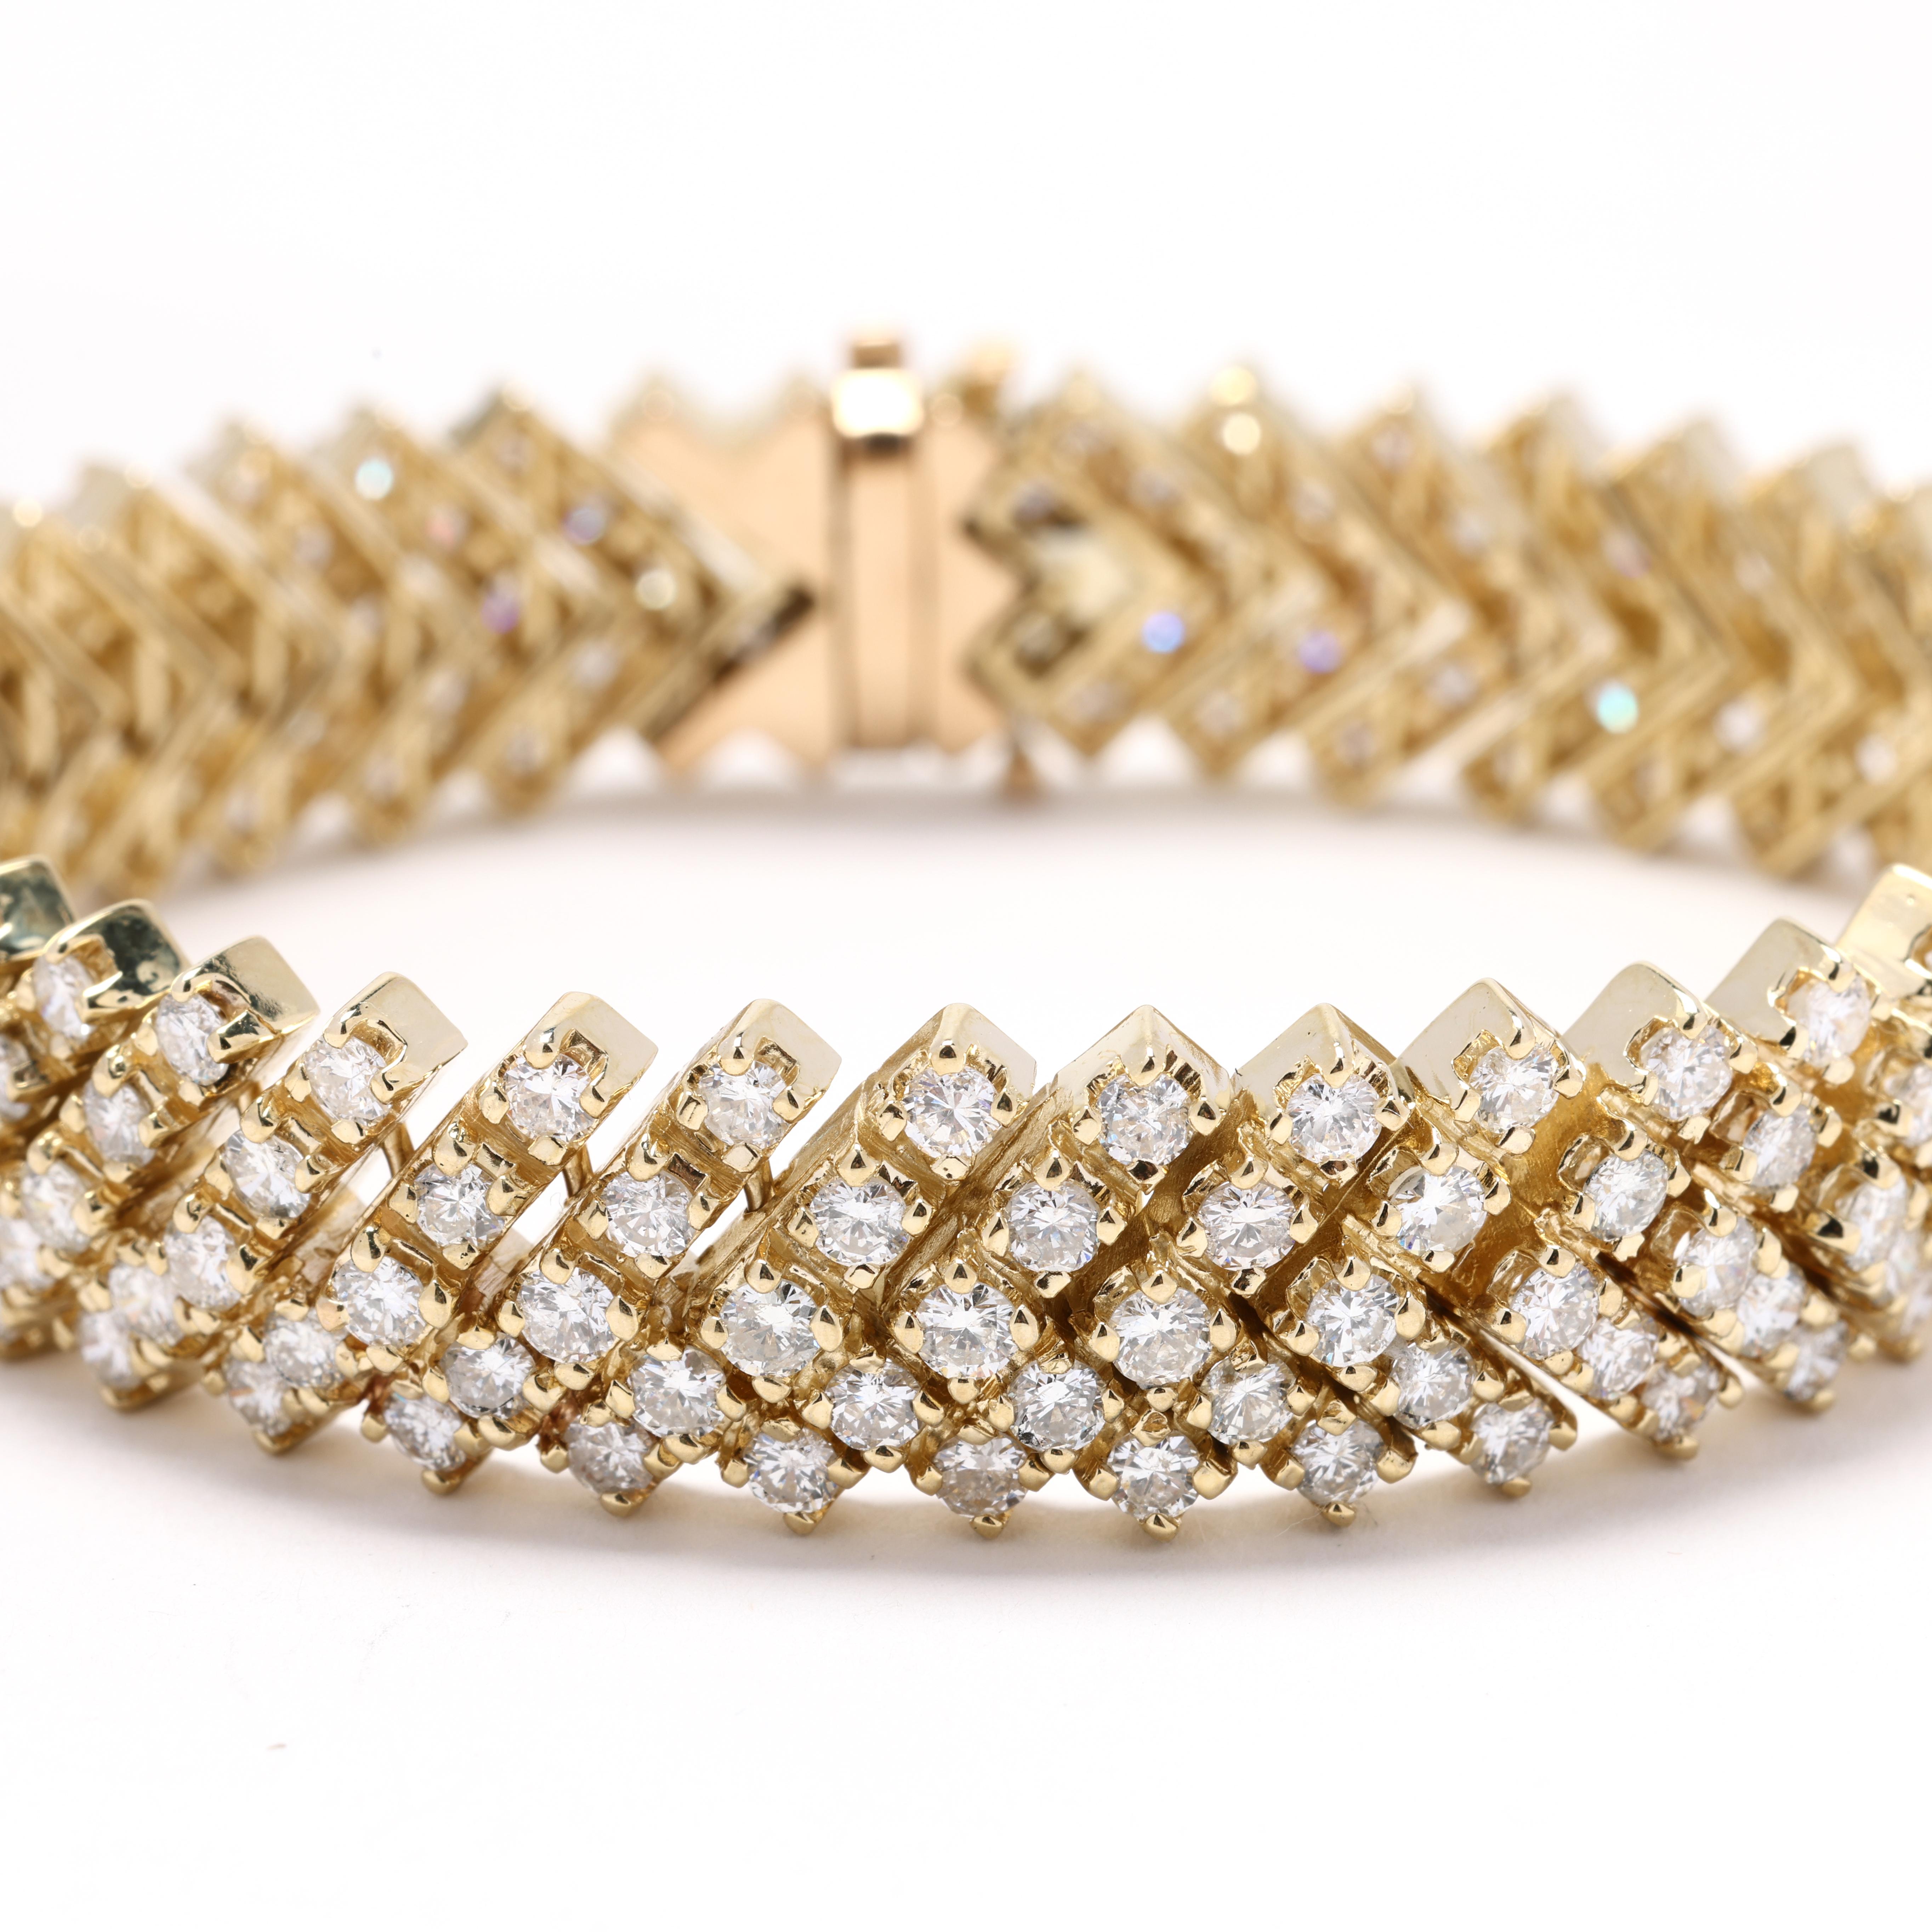 Indulge in luxury with this breathtaking 10ctw Diamond Link Bracelet. Expertly crafted in radiant 14k yellow gold, this opulent bracelet features a dazzling array of round brilliant diamonds meticulously set in intricately designed links, creating a